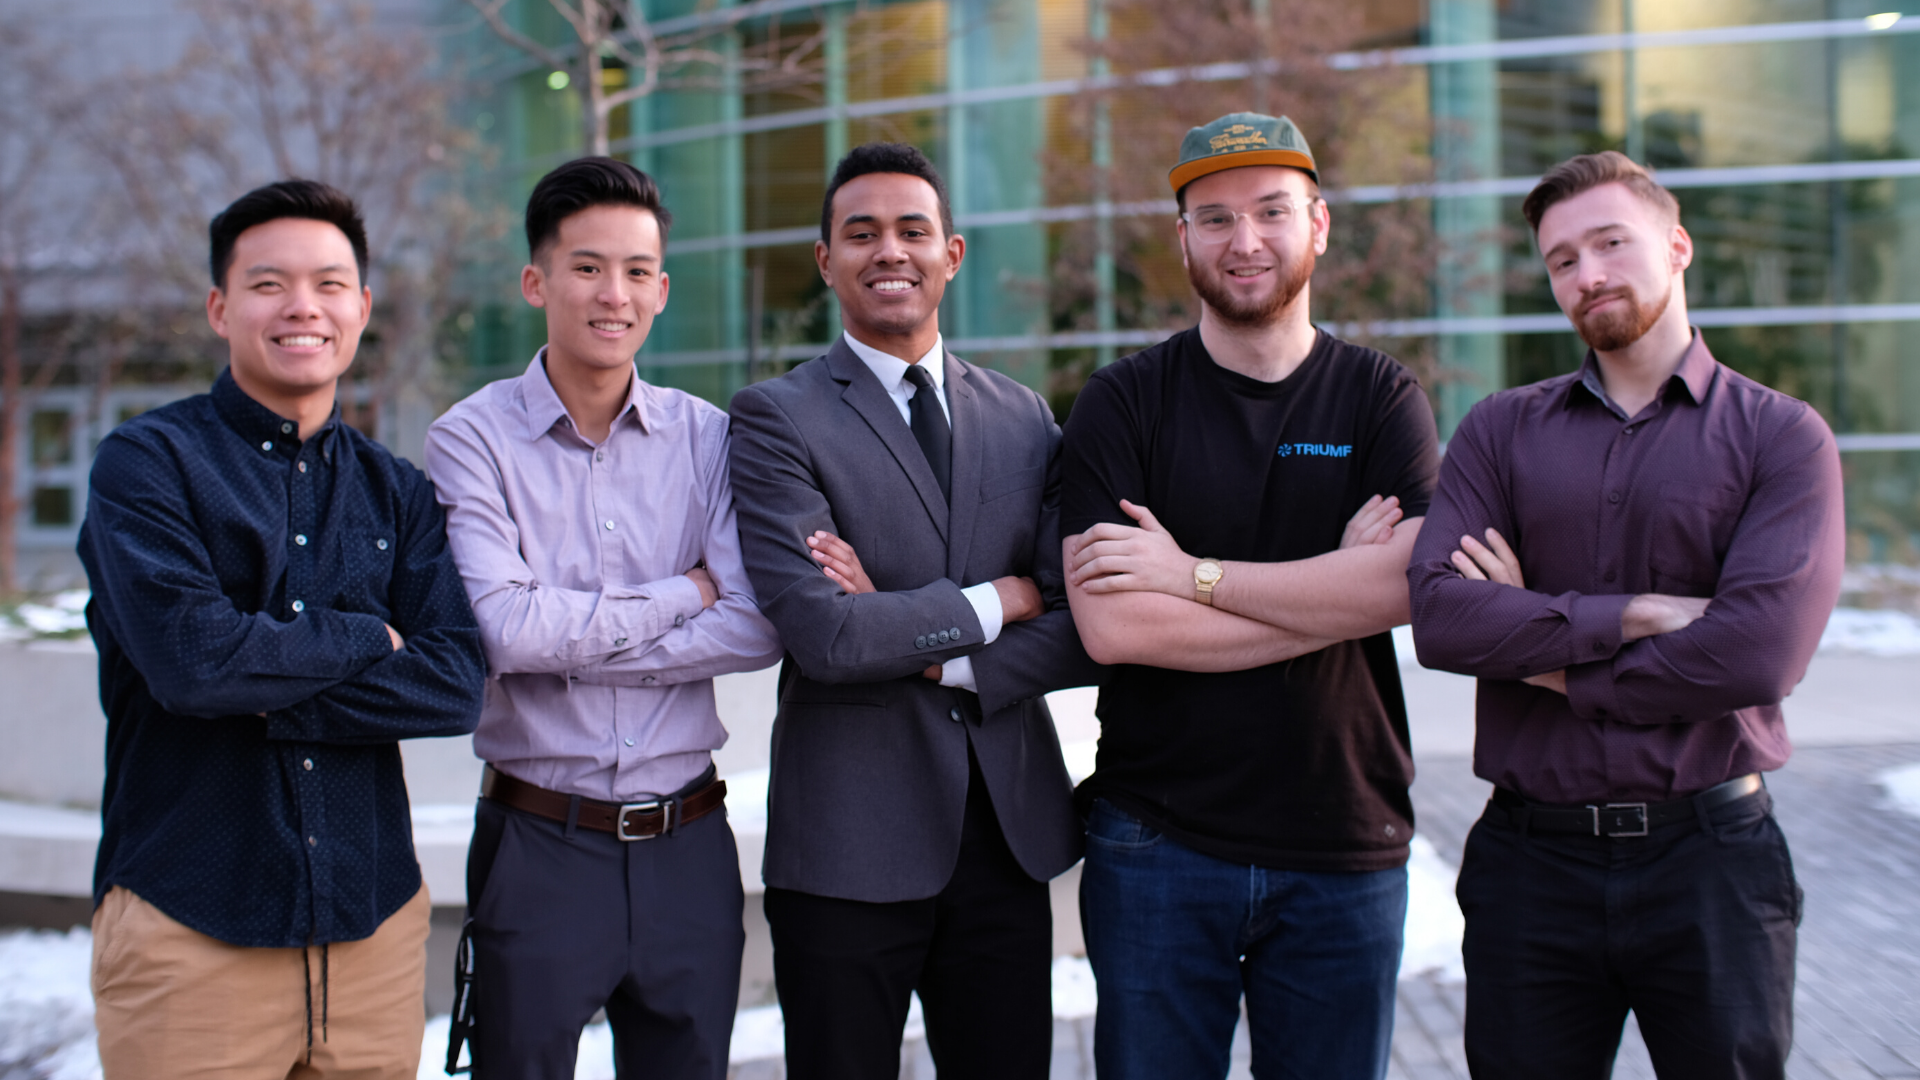 McMaster Engineering startup tuning up for Dragon's Den